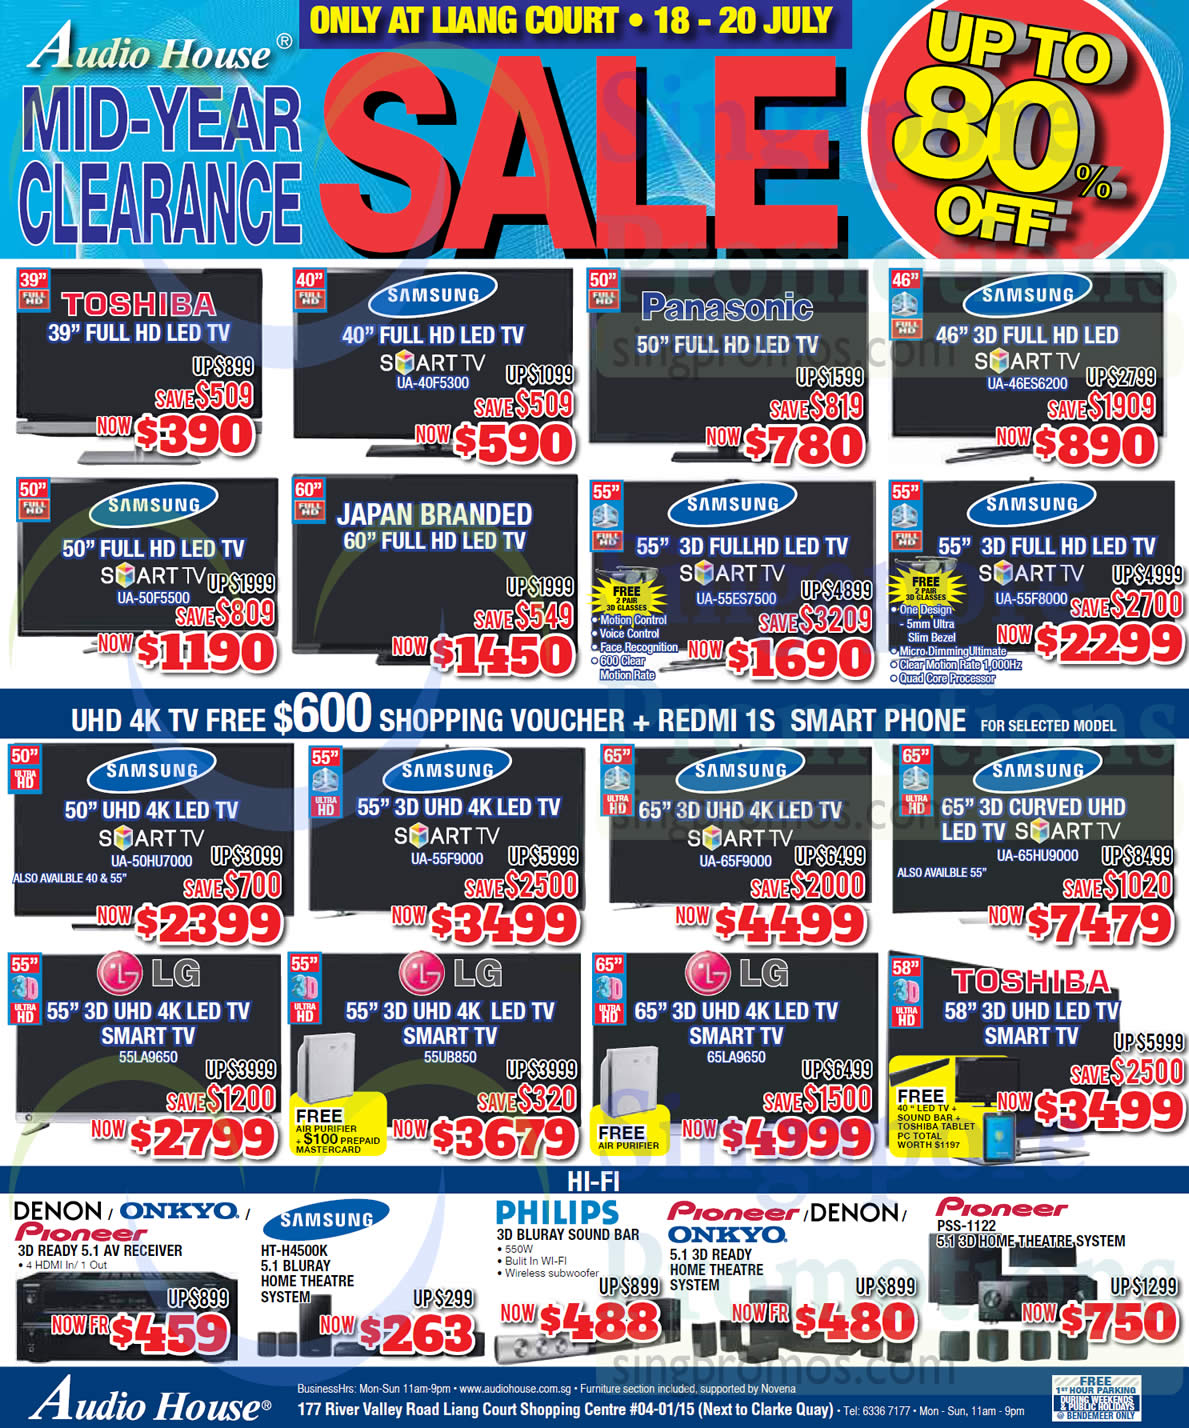 Featured image for Audio House Electronics, TV, Notebooks & Appliances Offers @ Liang Court 18 - 20 Jul 2014